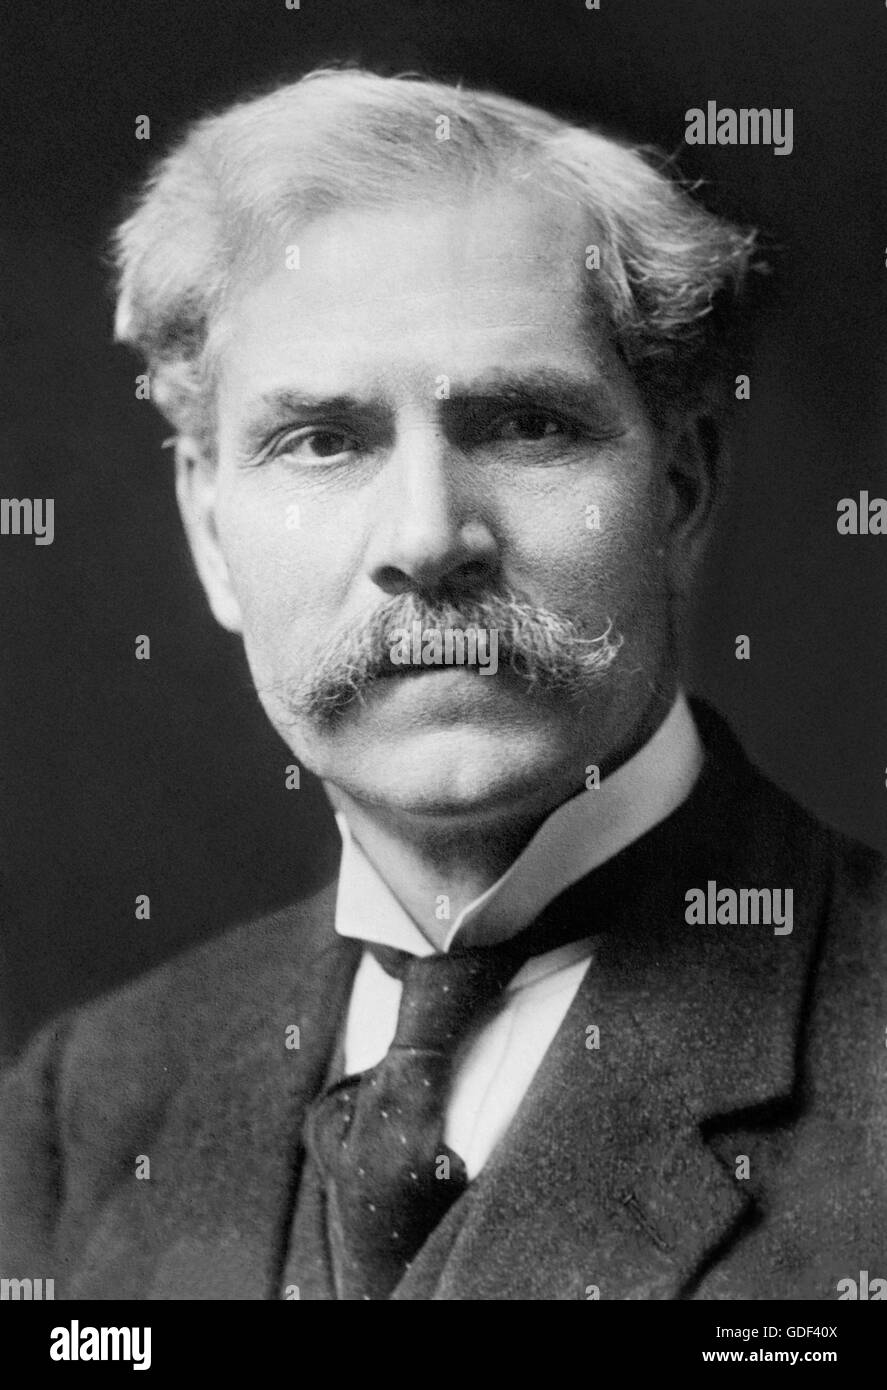 Ramsay Macdonald. Portrait of the British Labour party Prime Minister, James Ramsay MacDonald (1866-1937),  from Bain News Service, c.1925. Stock Photo